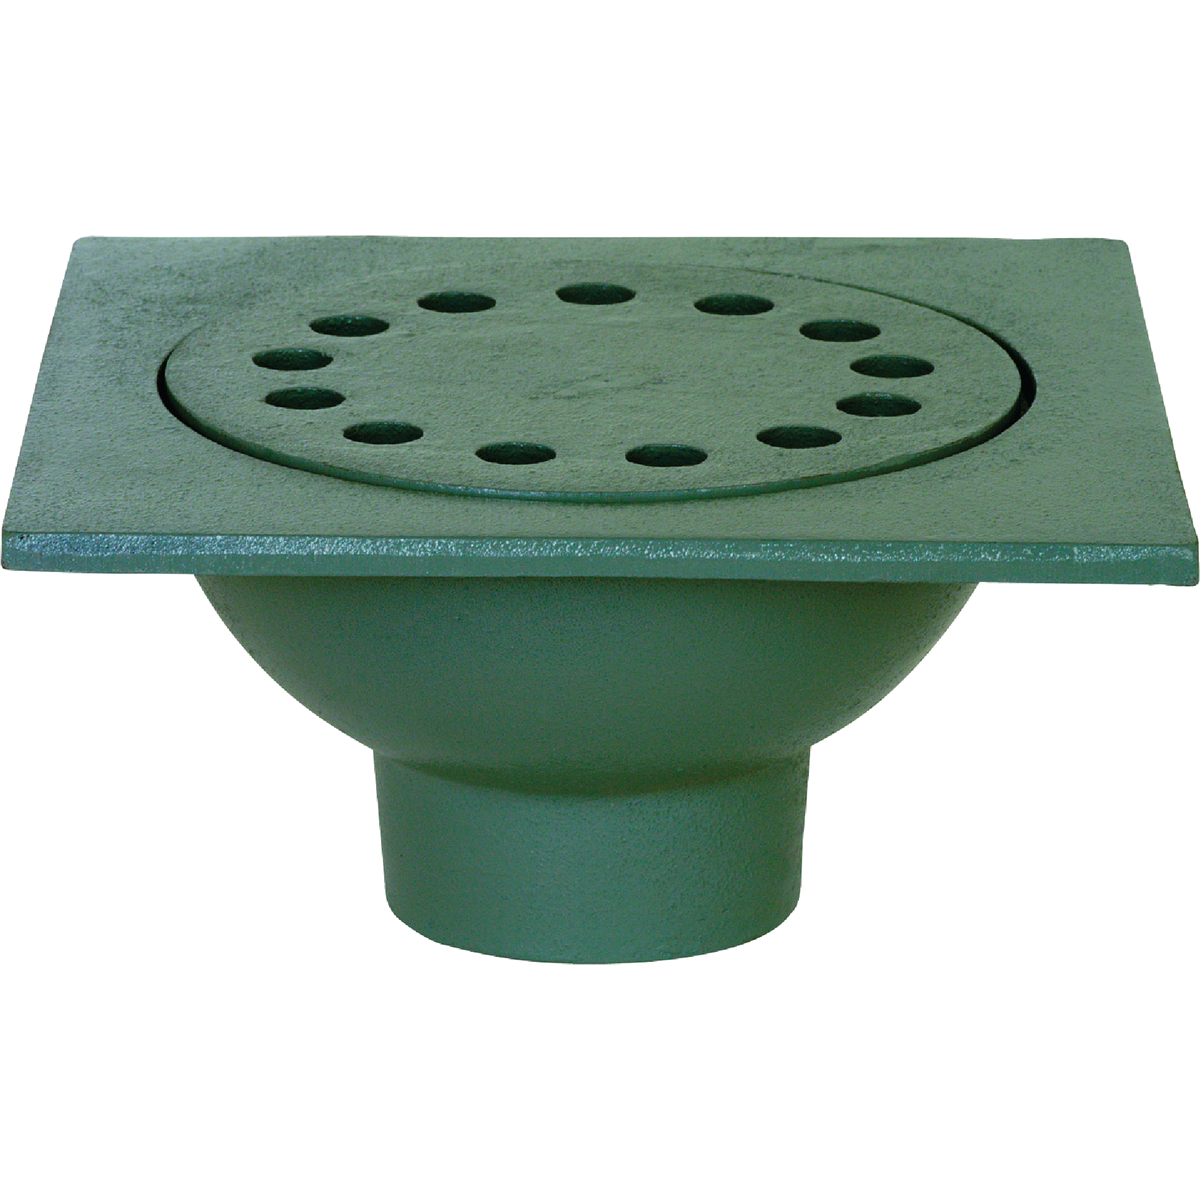 Cast Iron Sewer & Drain Bell Trap